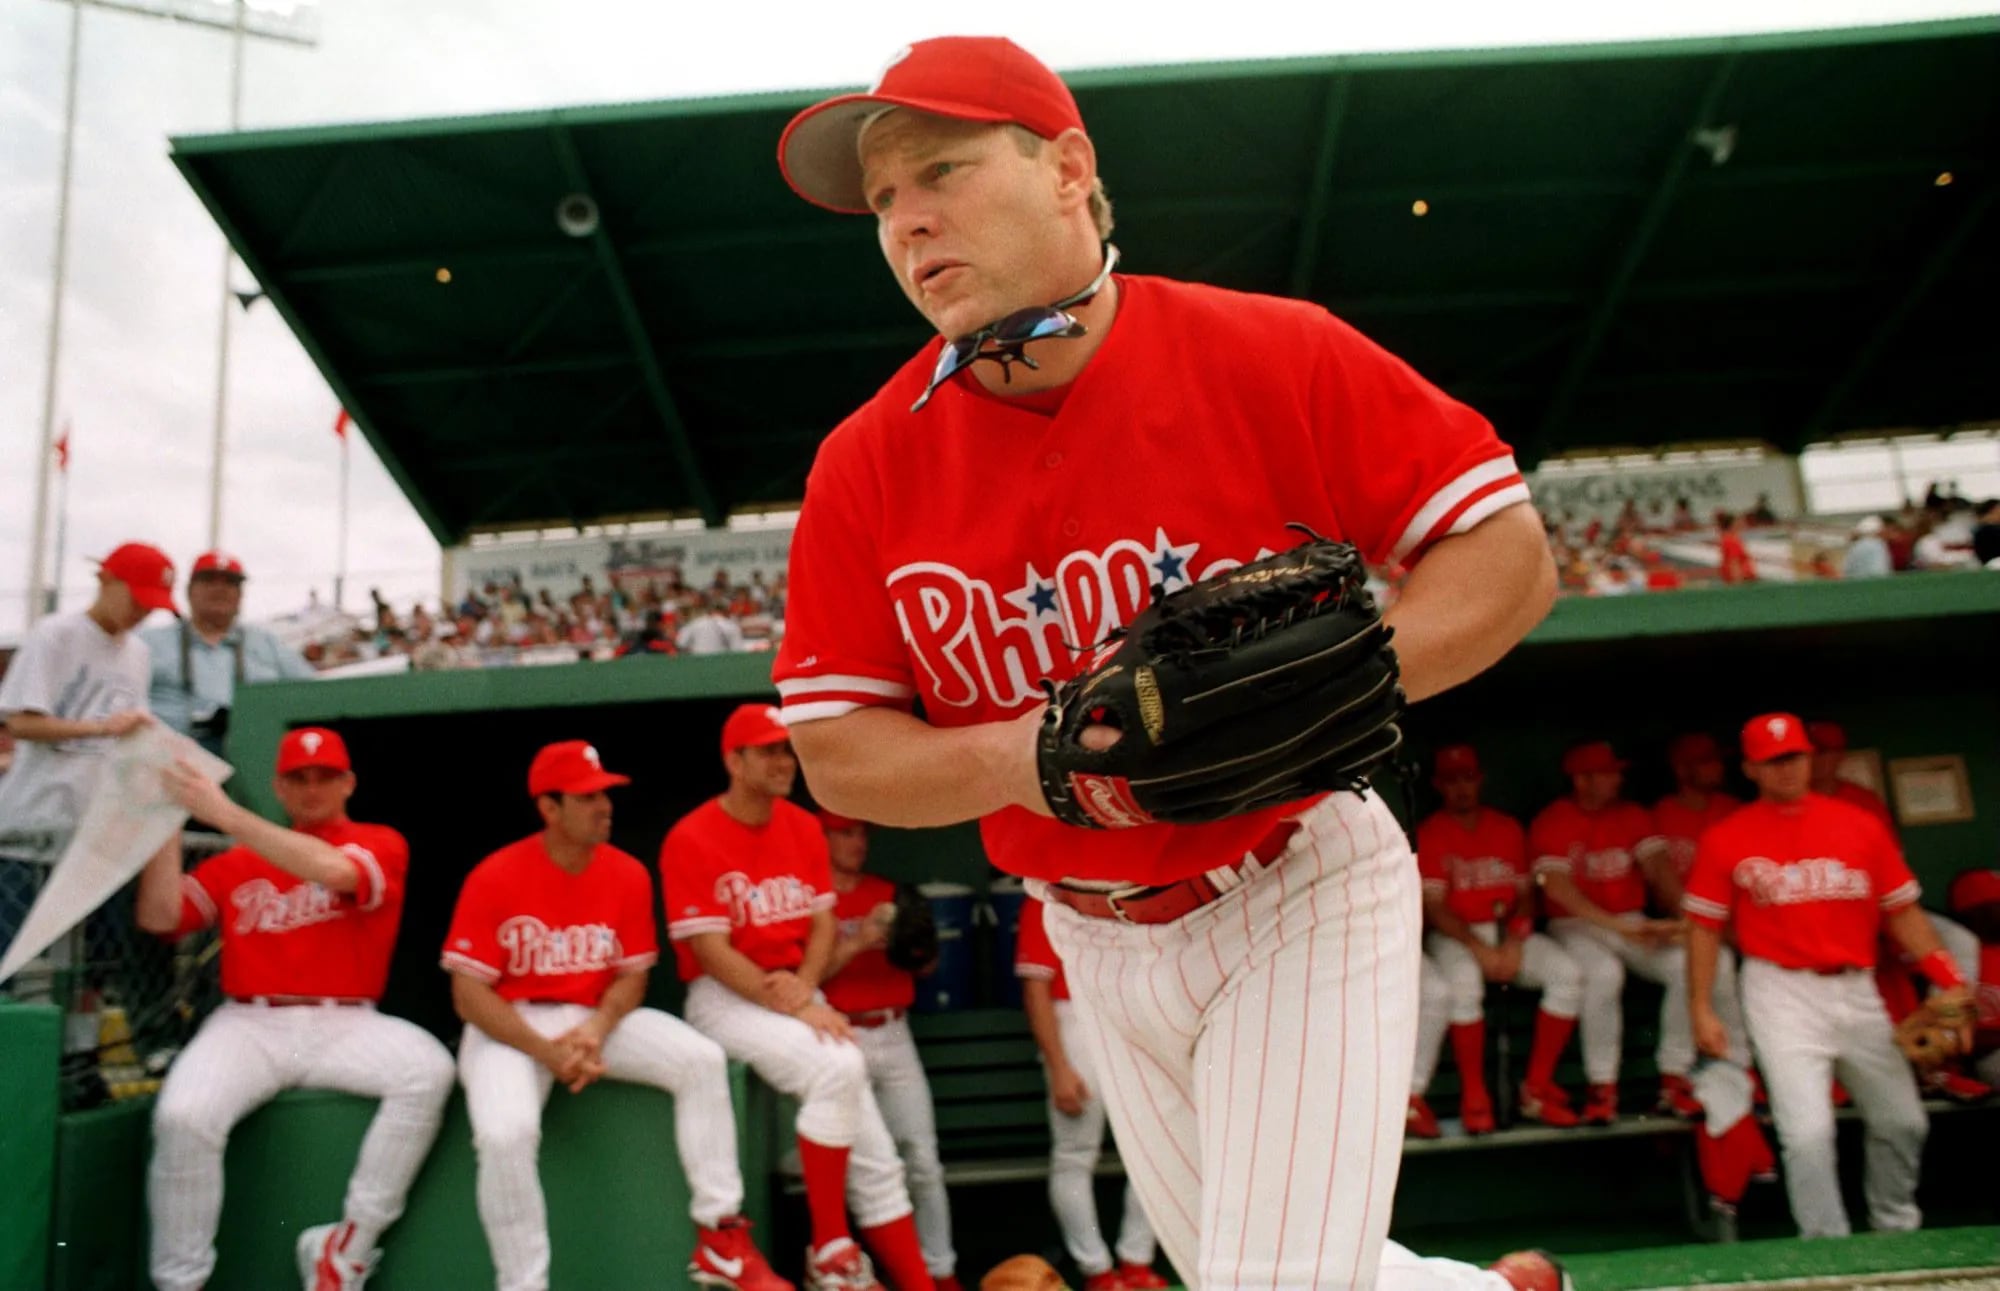 Is Lenny Dykstra the biggest fraud in sports? - Quora